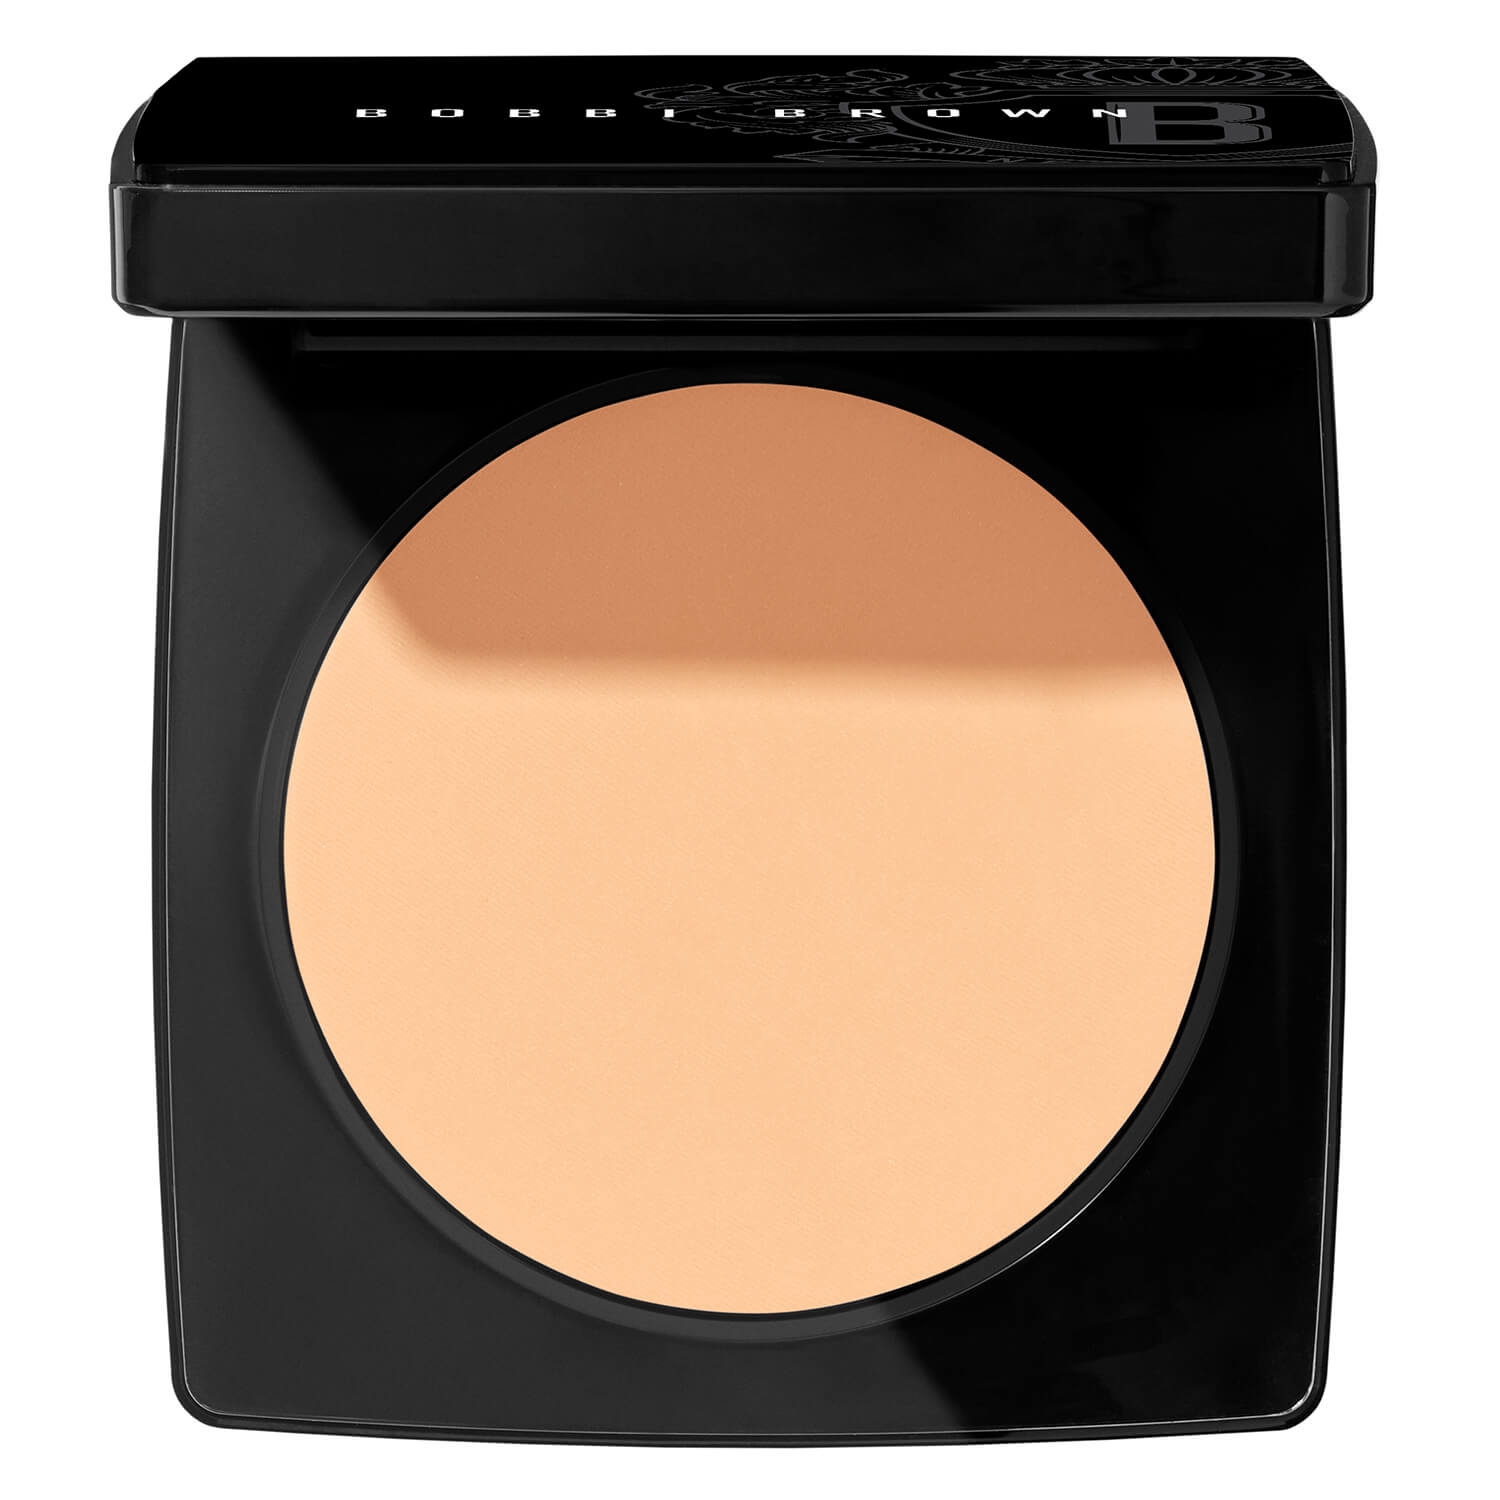 Product image from BB Powder - Sheer Finish Pressed Powder Sunny Beige